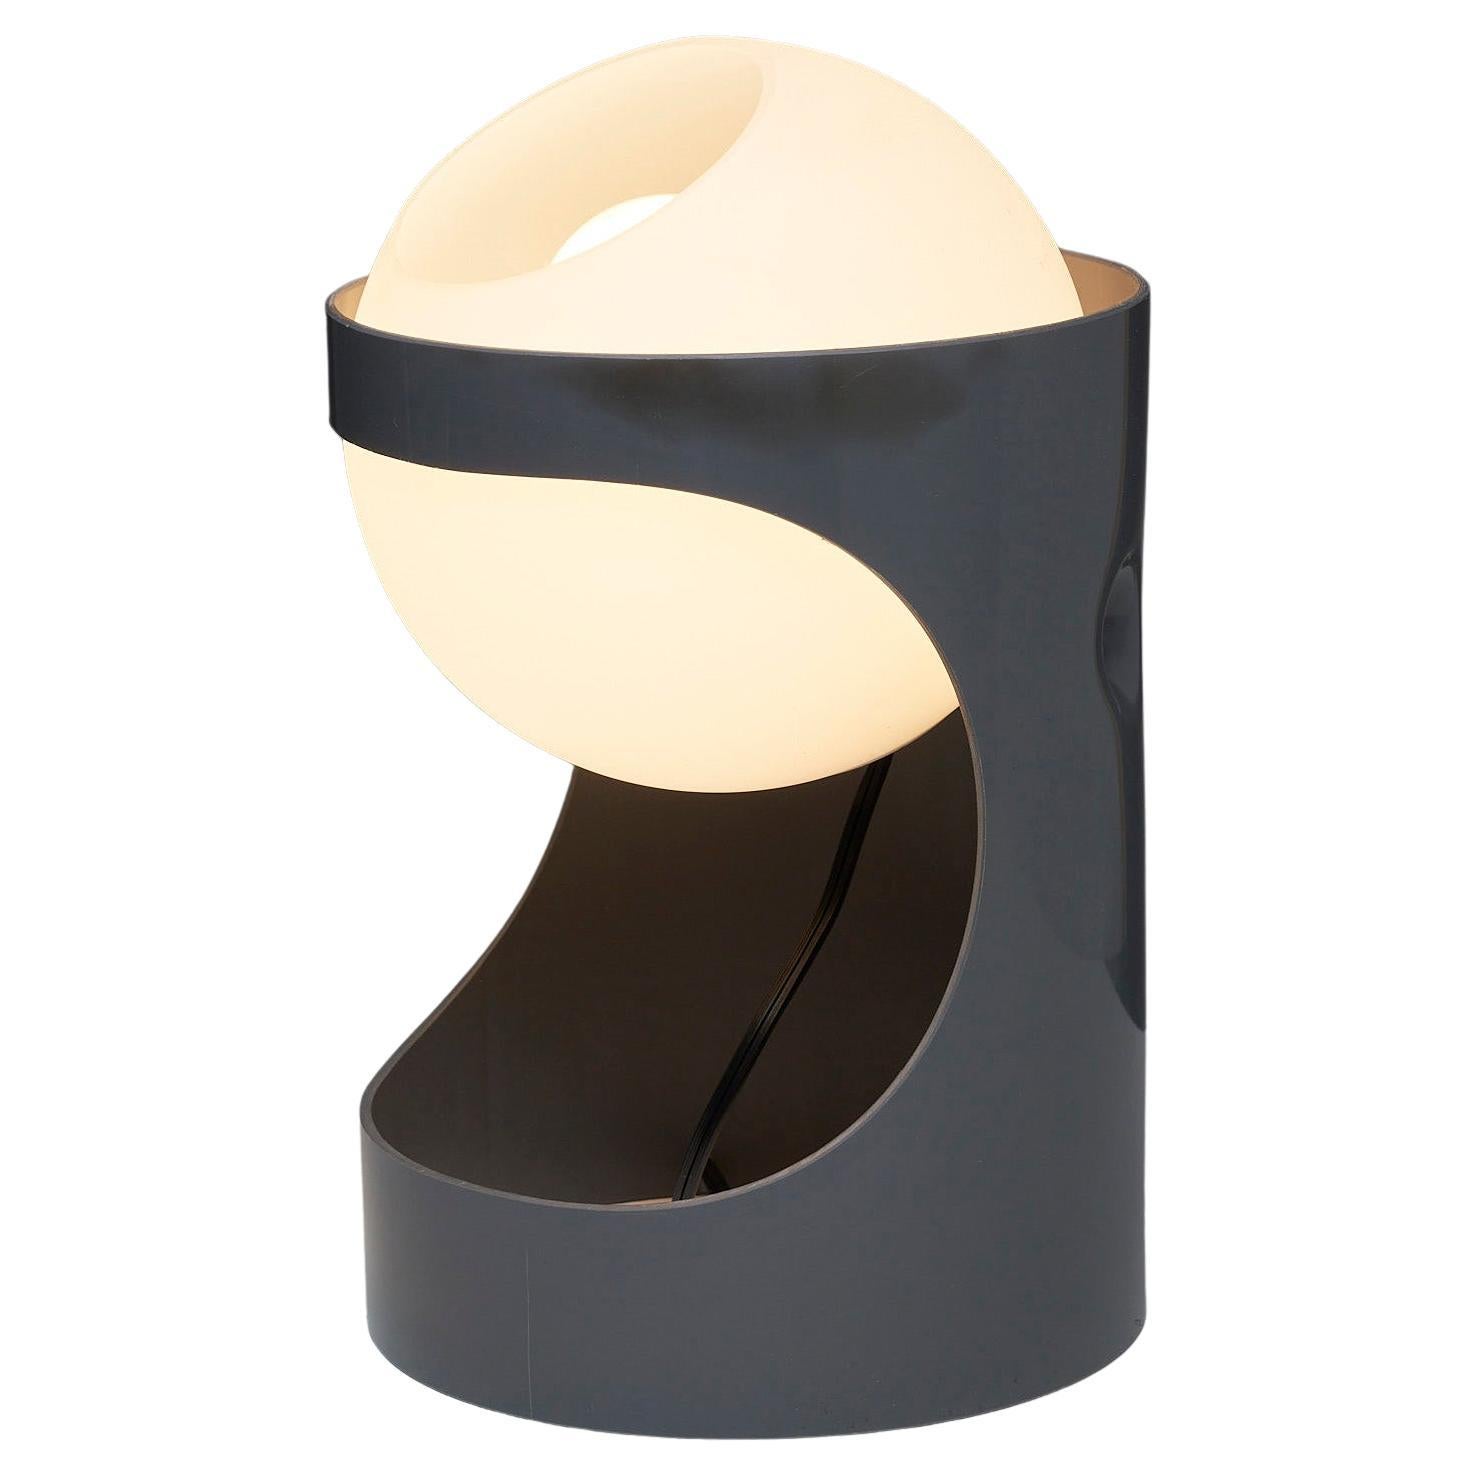 'L1 Guggerli' Table Lamp By Rico and Rosemarie For Baltensweiler AG For Sale